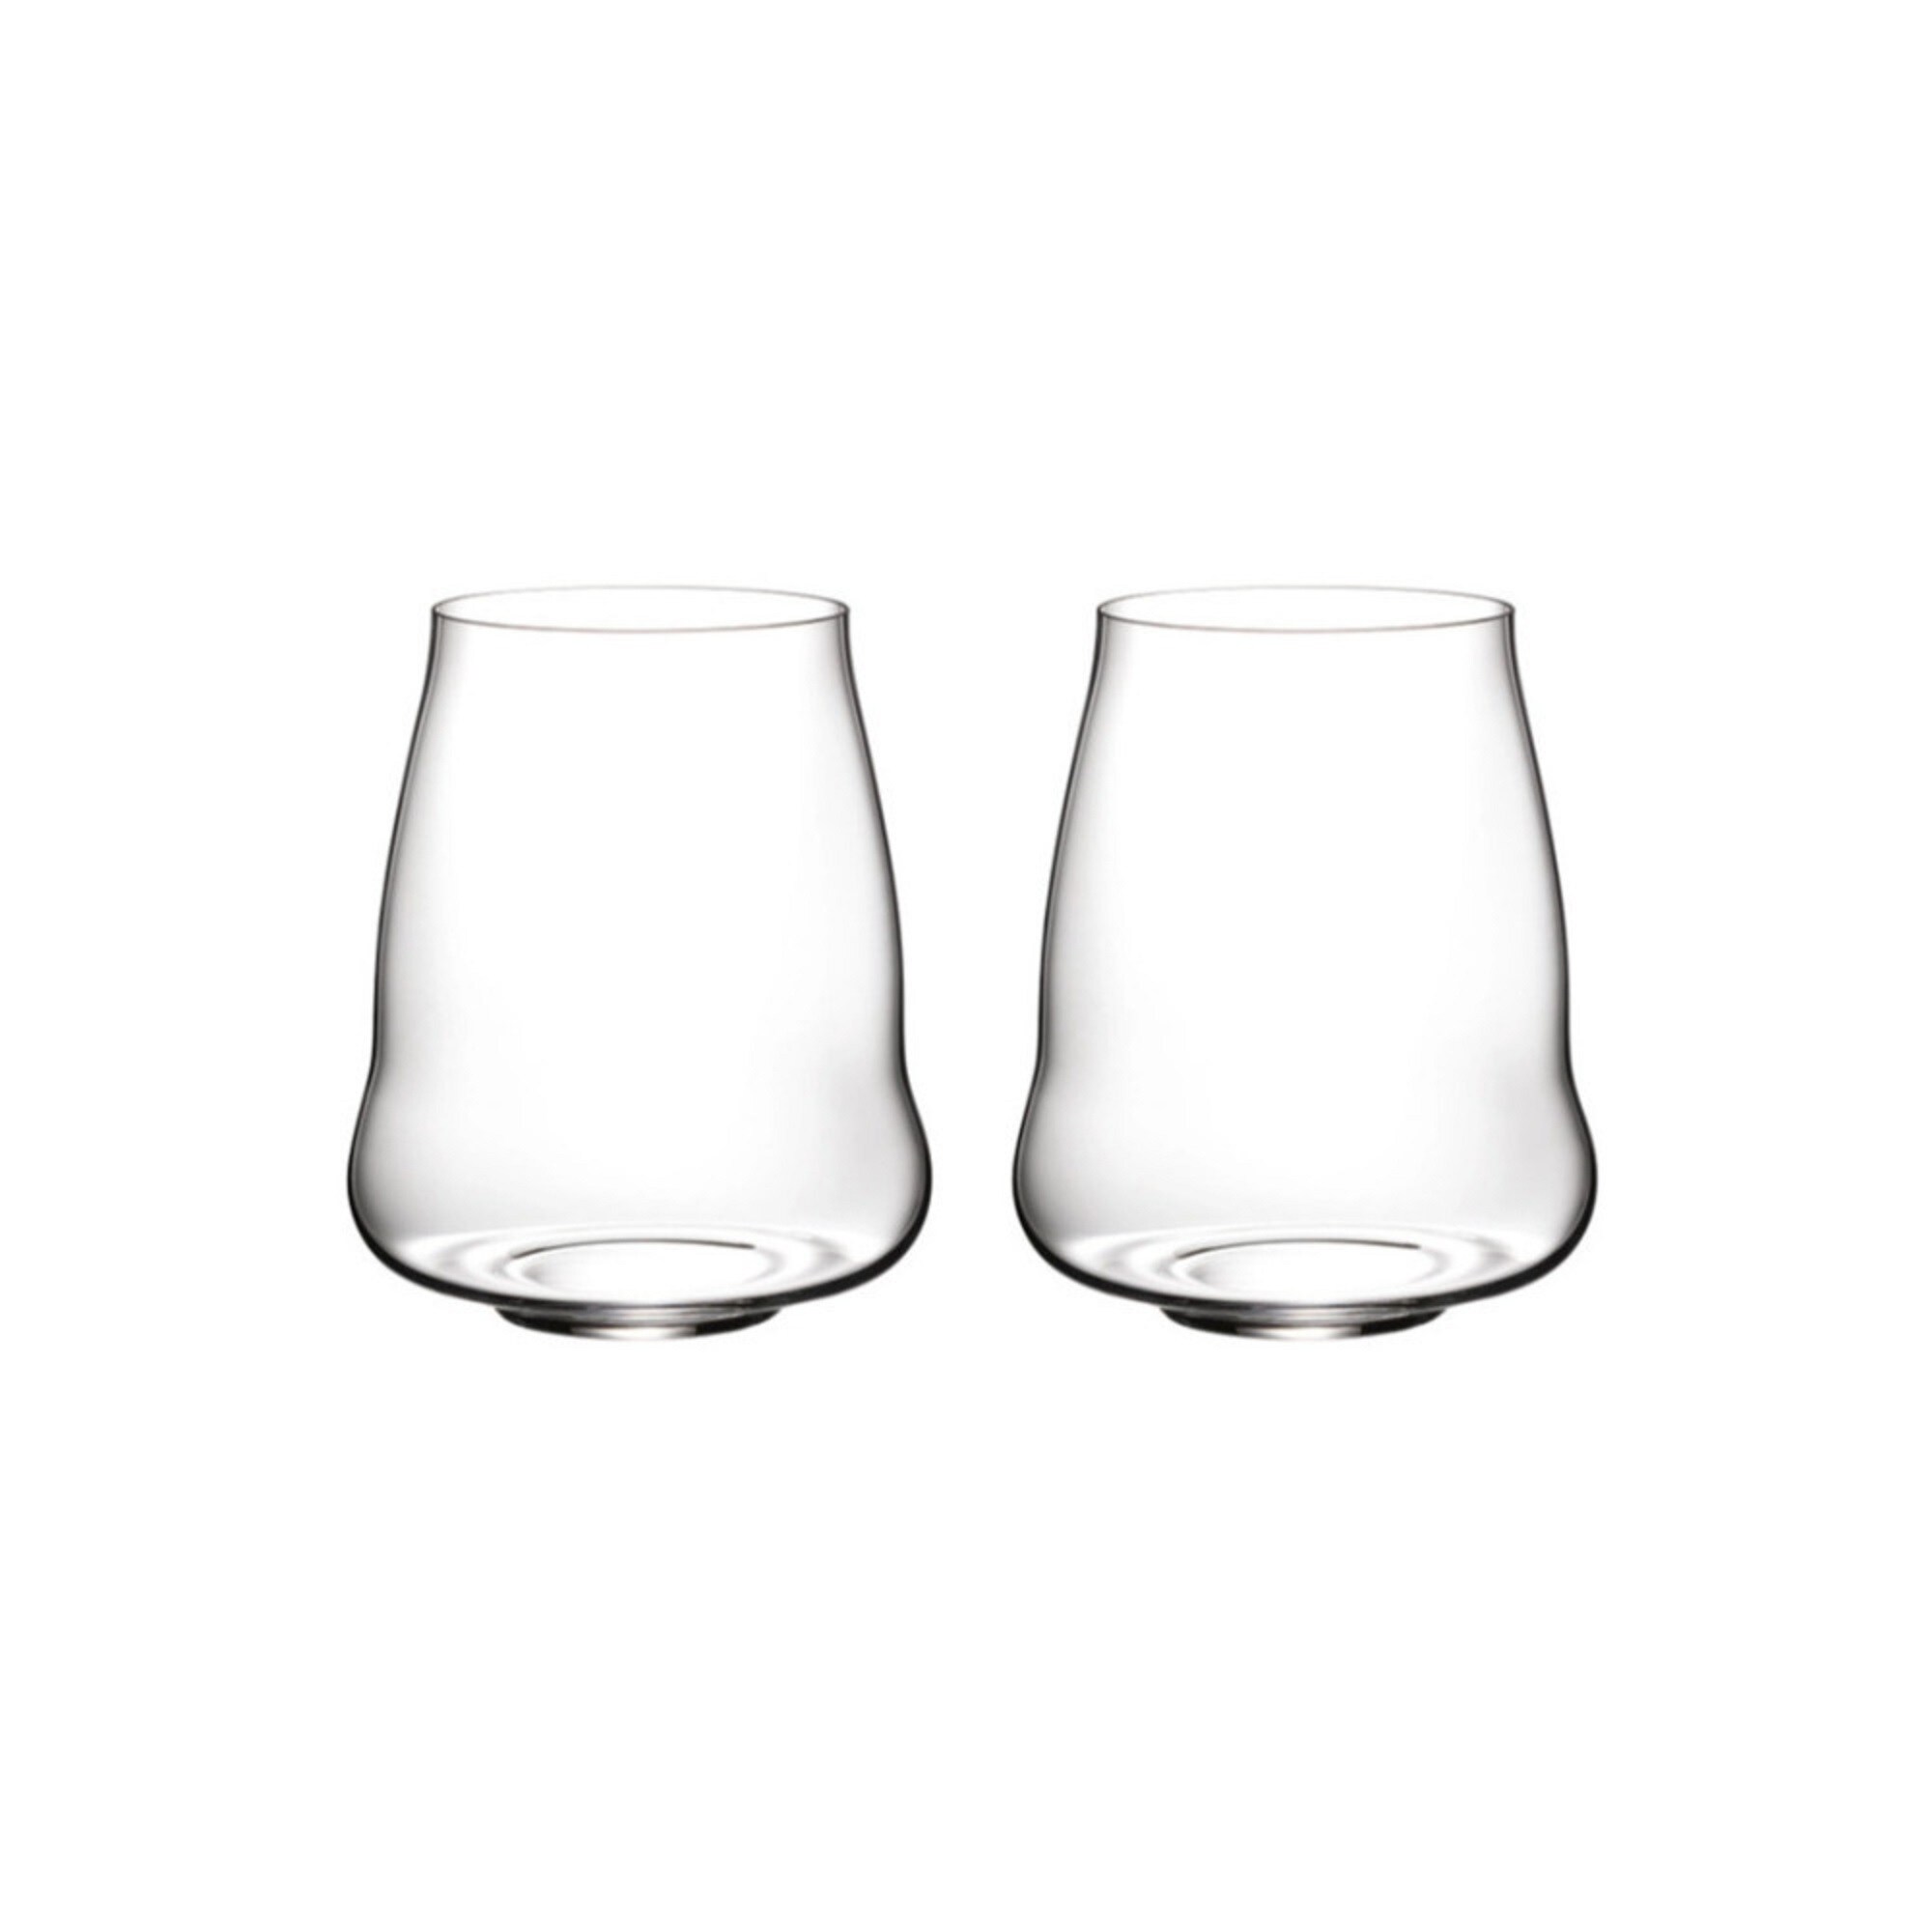 https://ak1.ostkcdn.com/images/products/is/images/direct/a0add818140647145cb7cf99fe70e978b0ba3c46/Riedel-SL-Stemless-Wings-Pinot-Noir-Nebbiolo-Wine-Glass-%284-Pk%29-Bundle.jpg